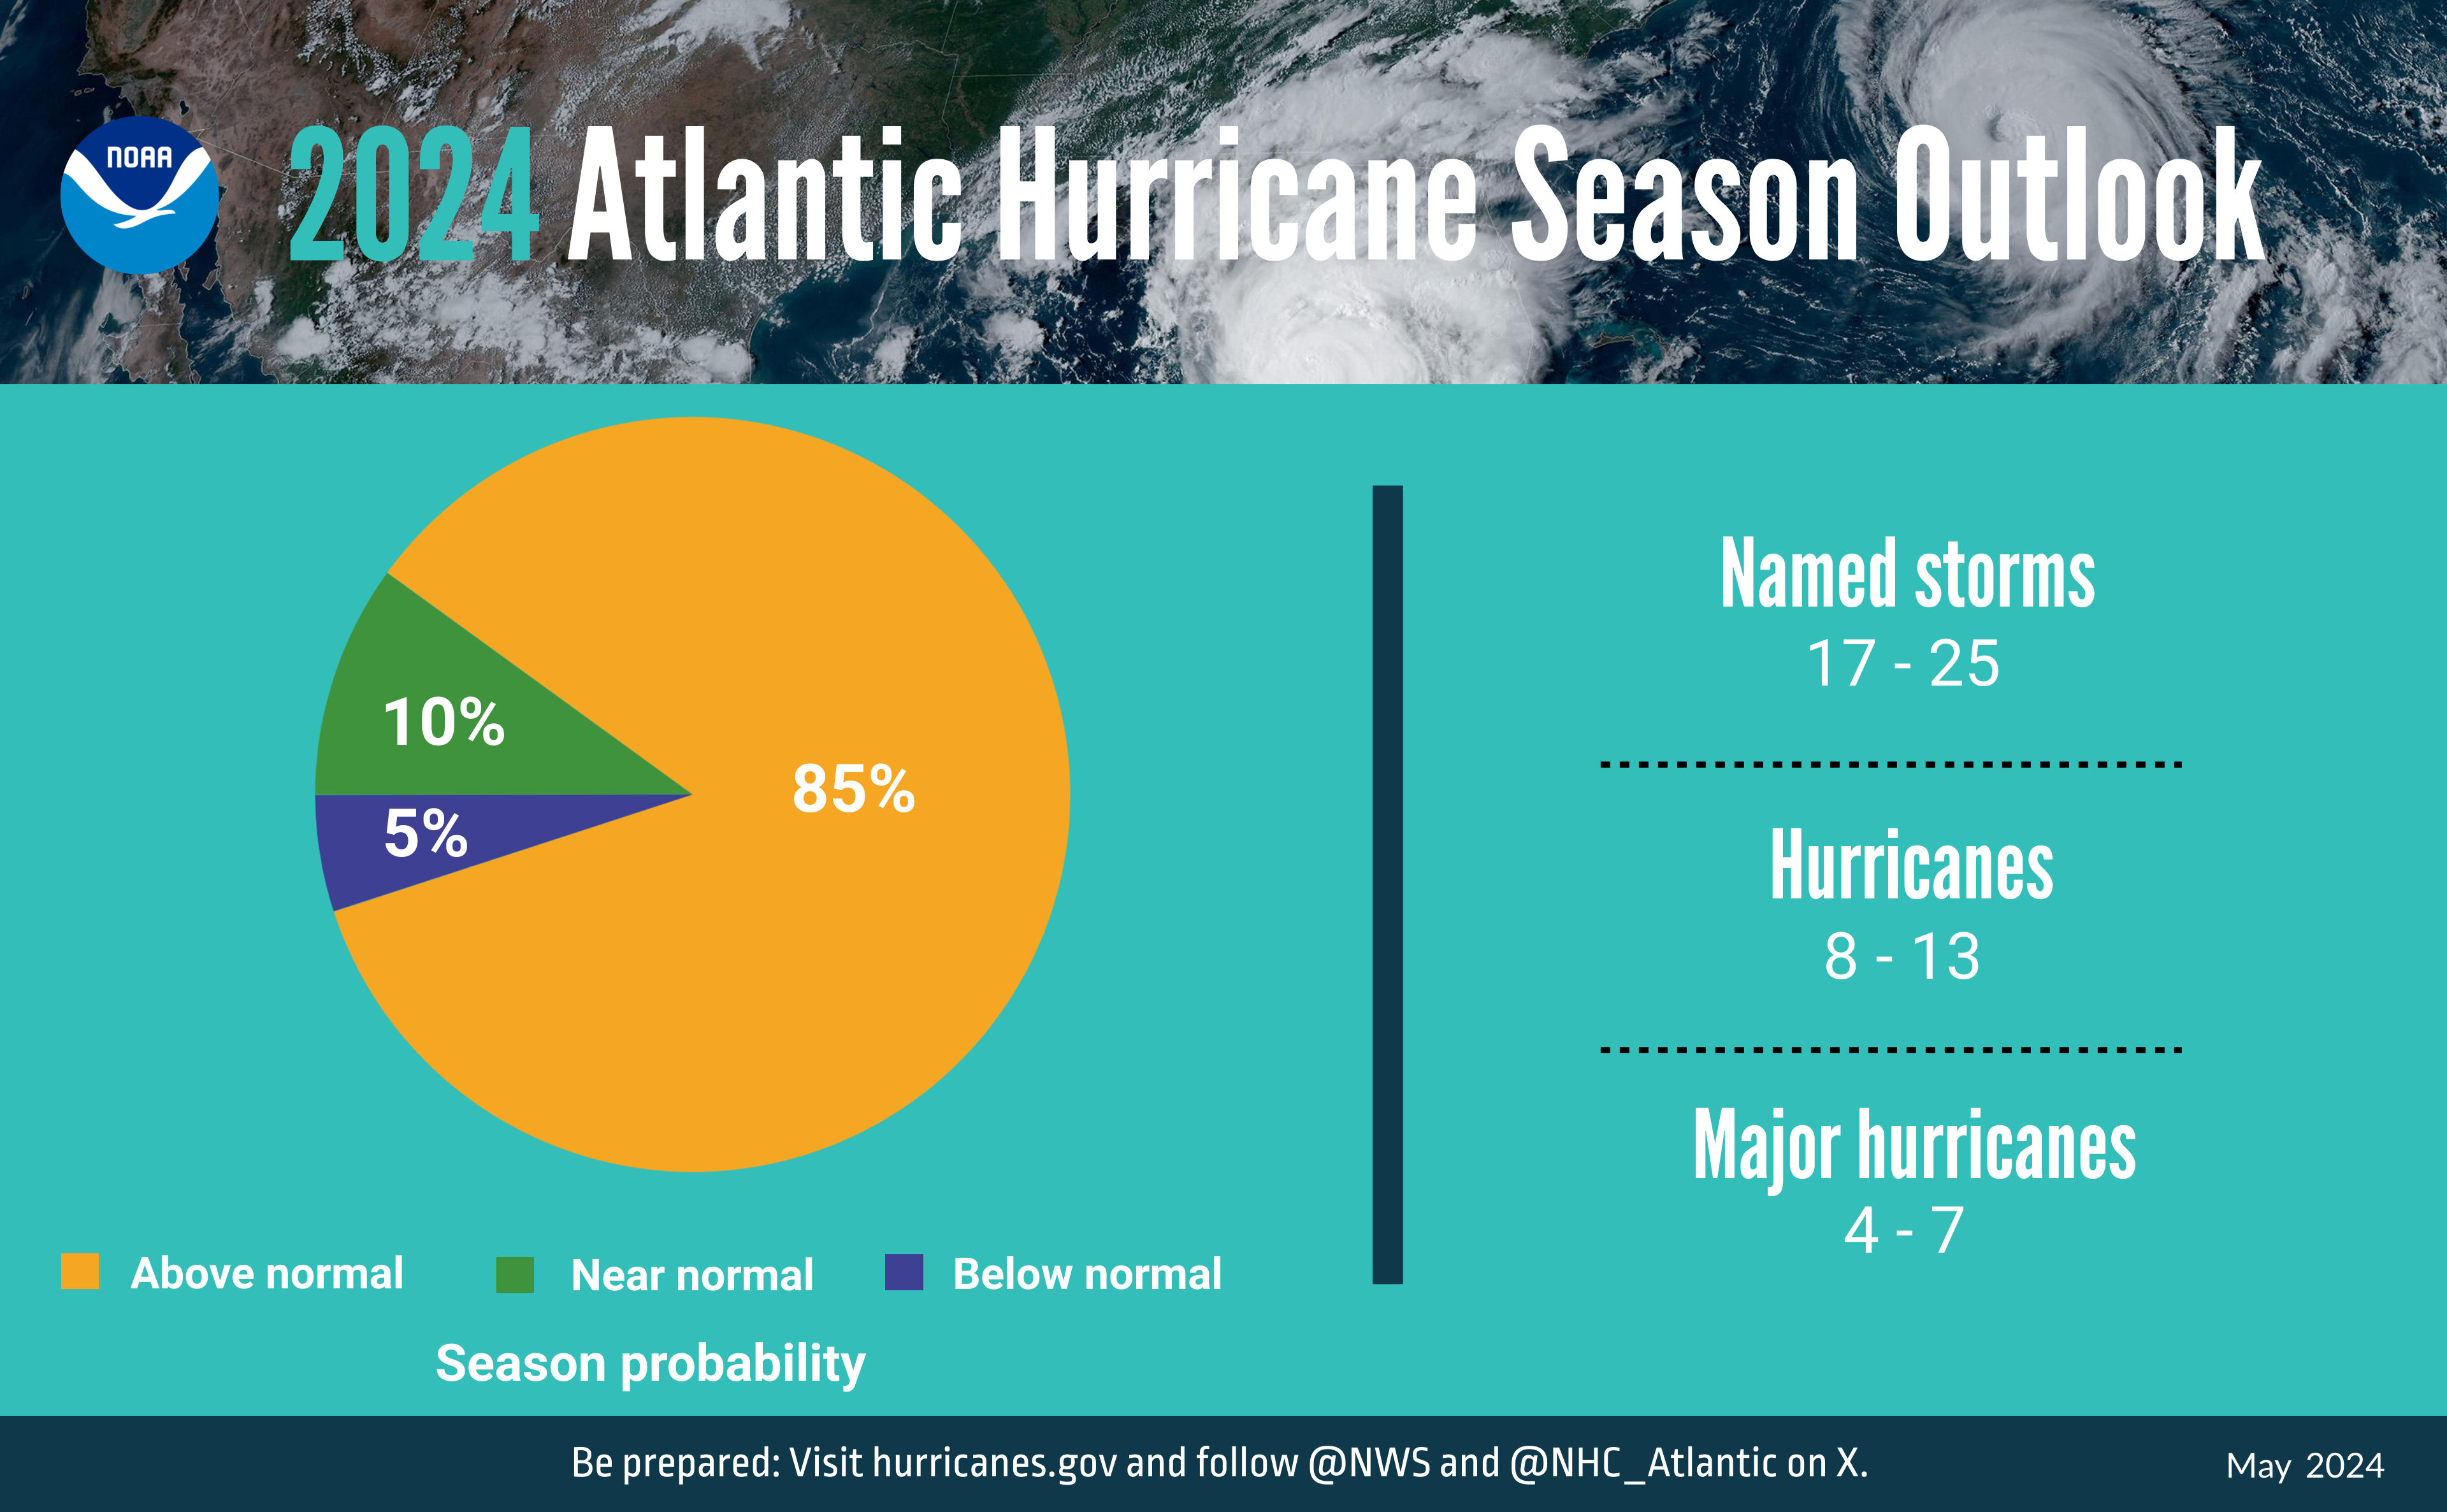 NOAA 2024 Atlantic Hurricane Season Outlook - Season probability: 85% Above normal, 10% Near normal; 5% Below normal. Named storms: 7-25; Hurricanes: 8-13; Major hurricanes: 4-7. Be prepared: Visit hurricanes.gov and follow @NWS and @NHC_Atlantic on Twitter. May 2024.